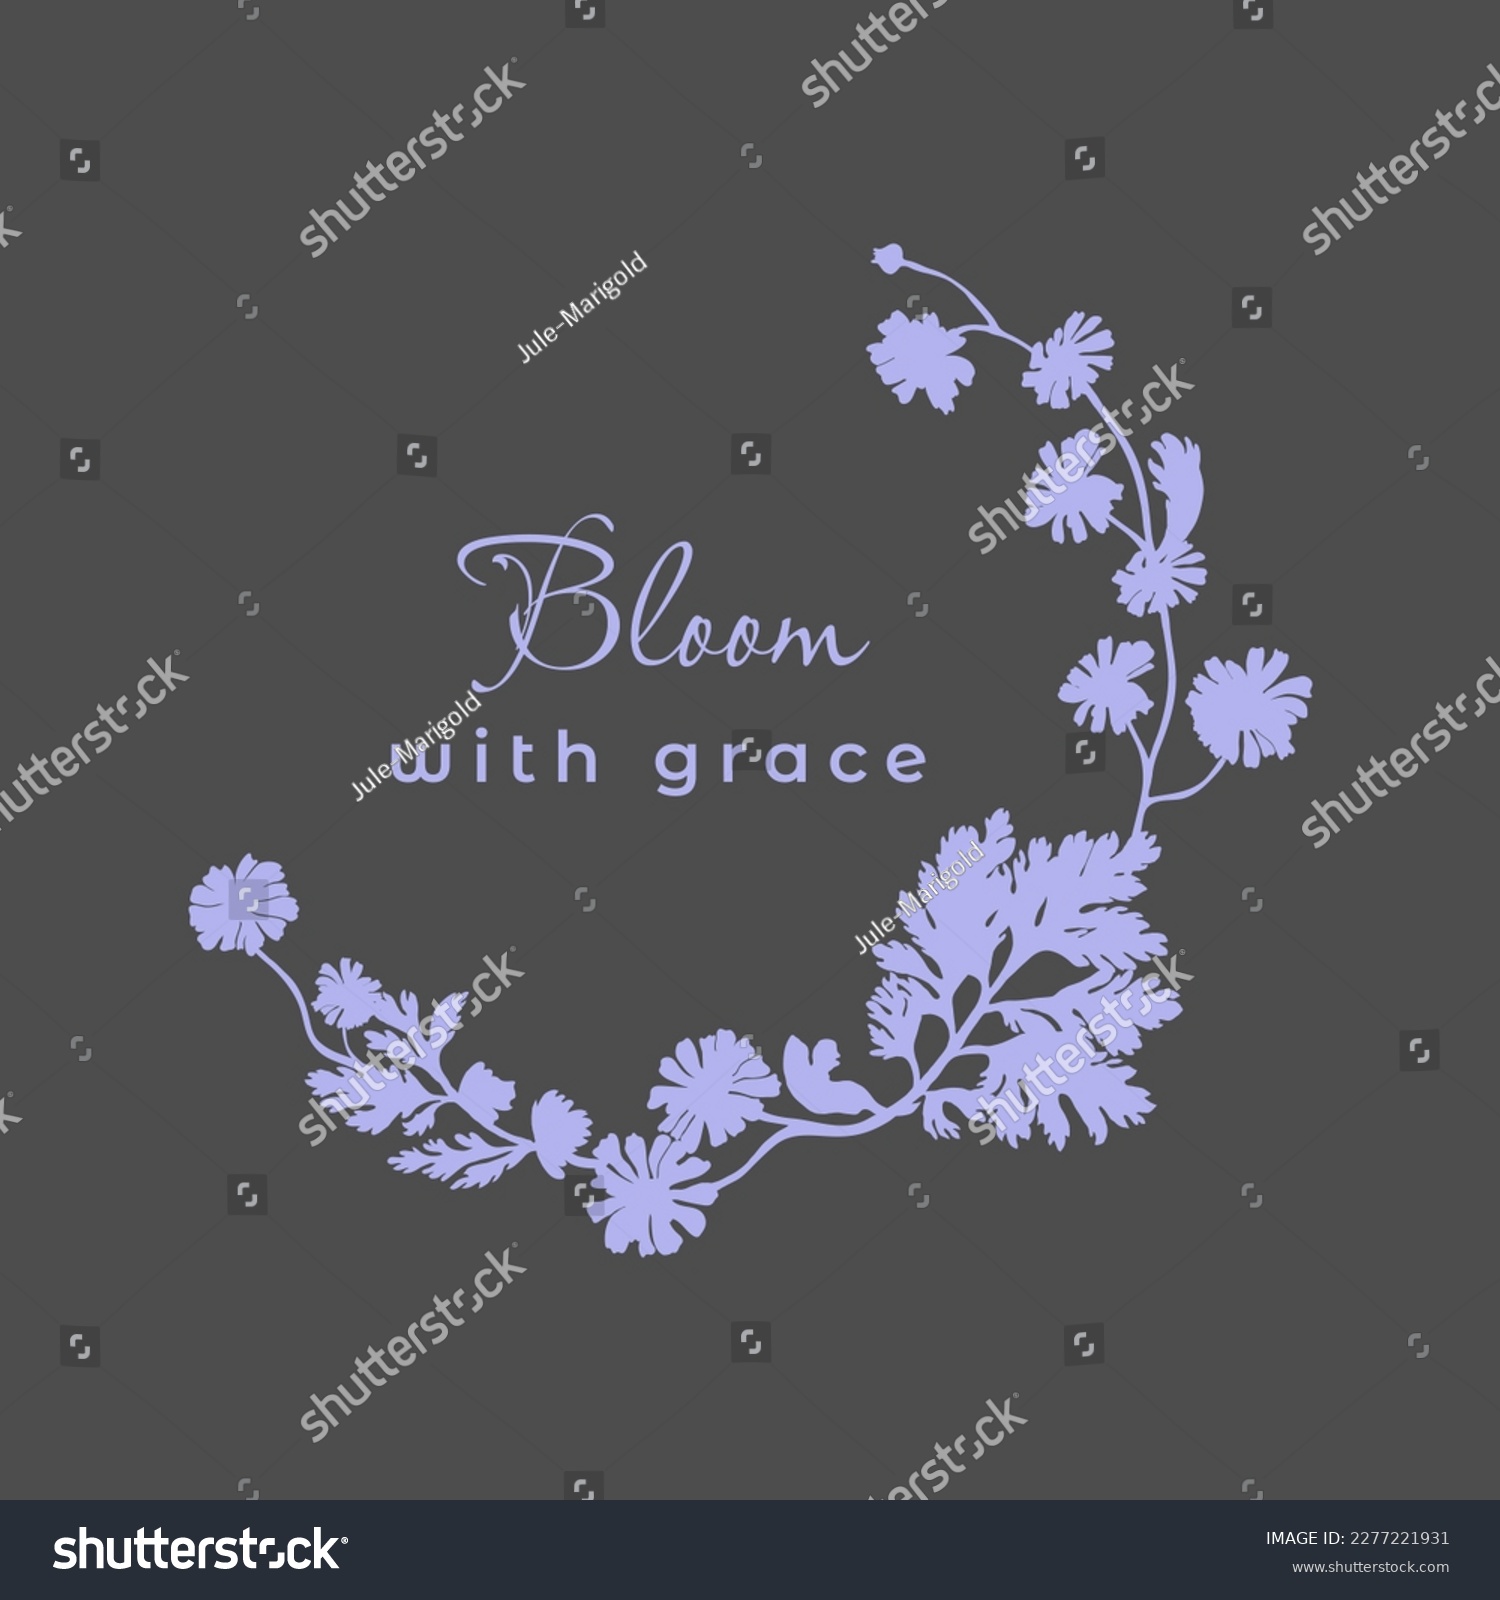 SVG of Isolated half-wreath with two-color daisy flowers. Violet flower parts are isolated on the dark background. Words bloom with grace in the center. svg